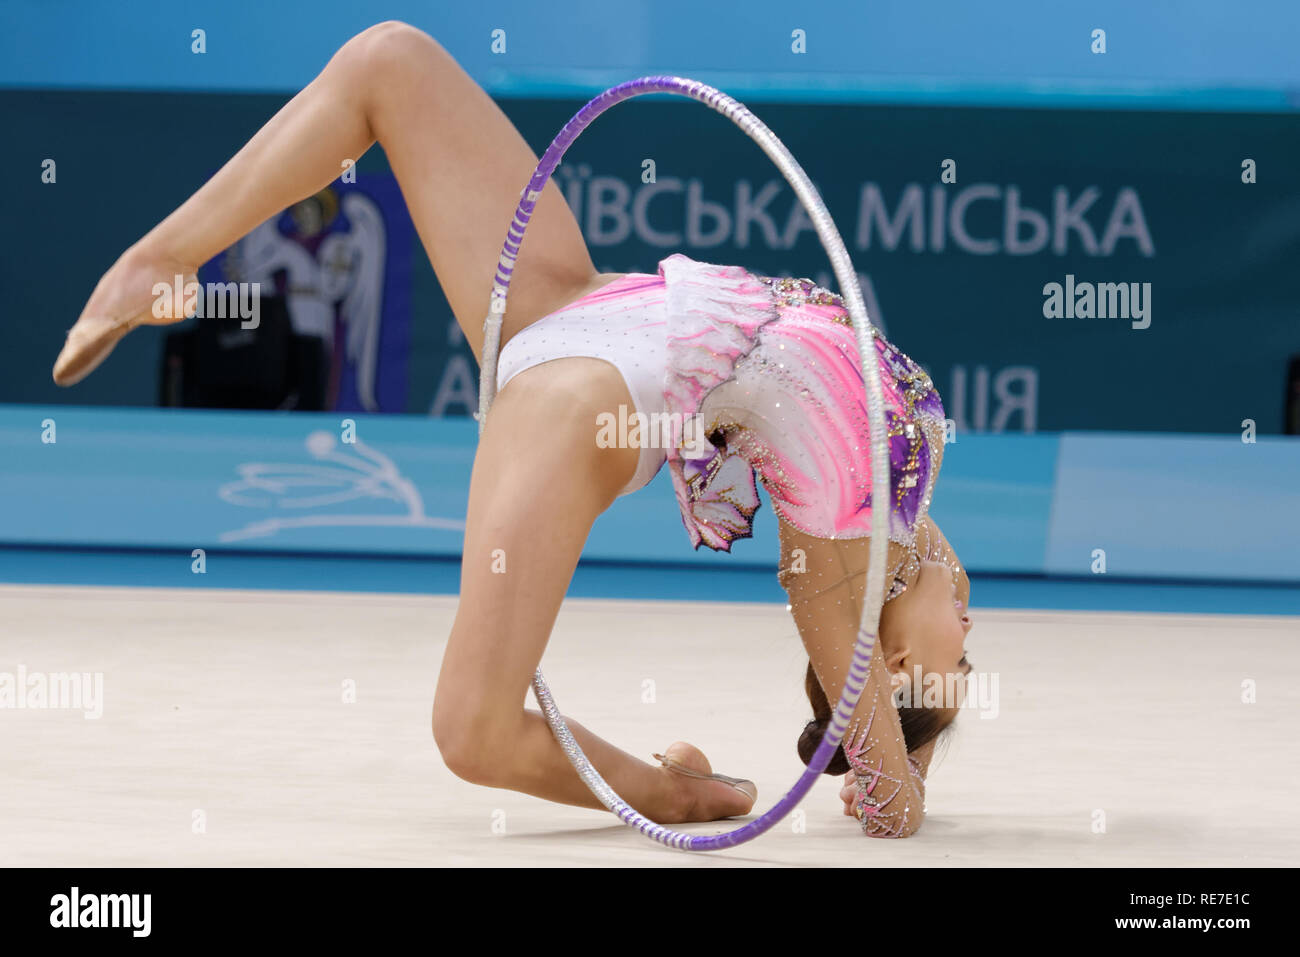 Kiev, Ukraine - August 28, 2013: Yeon Jae Son, Korea performs with hoop during 32nd Rhythmic Gymnastics World Championships. The event is held in Pala Stock Photo